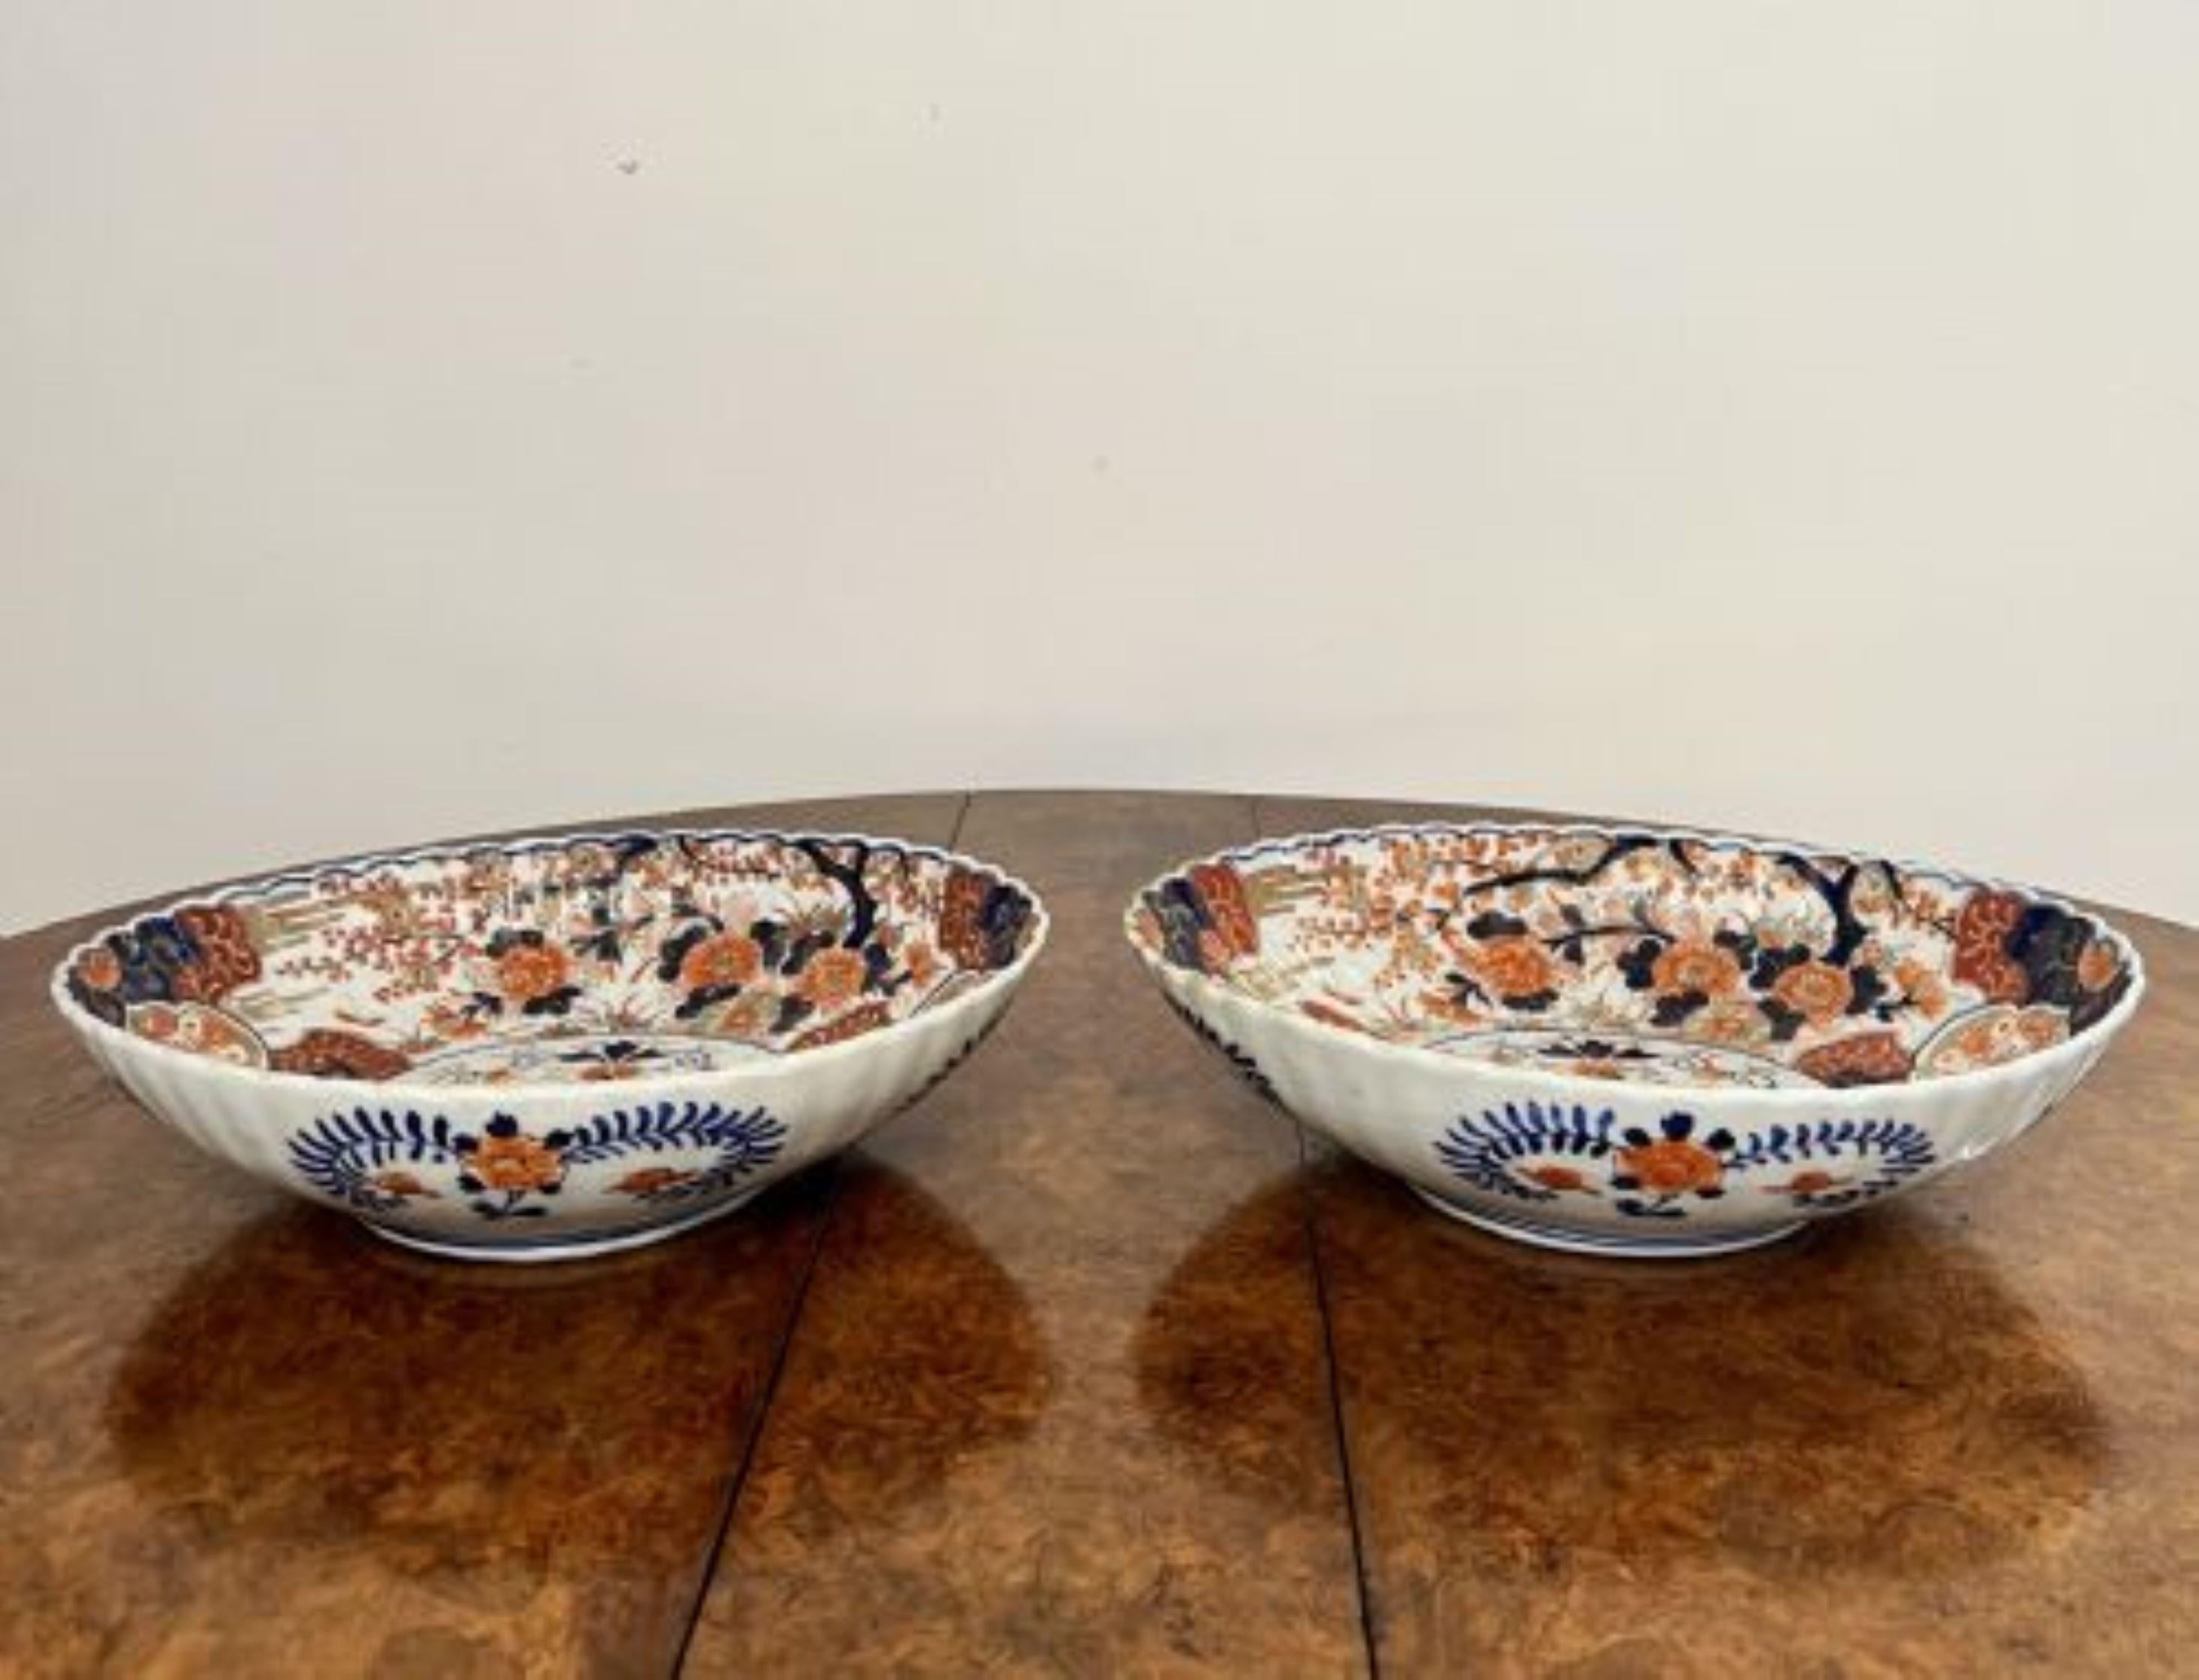 Outstanding quality pair of antique Japanese Imari large scalloped edge bowls having an outstanding quality pair of antique Japanese Imari scalloped edge bowls, oval in shape, decorated with flowers, trees and scrolls in fantastic red, blue, white